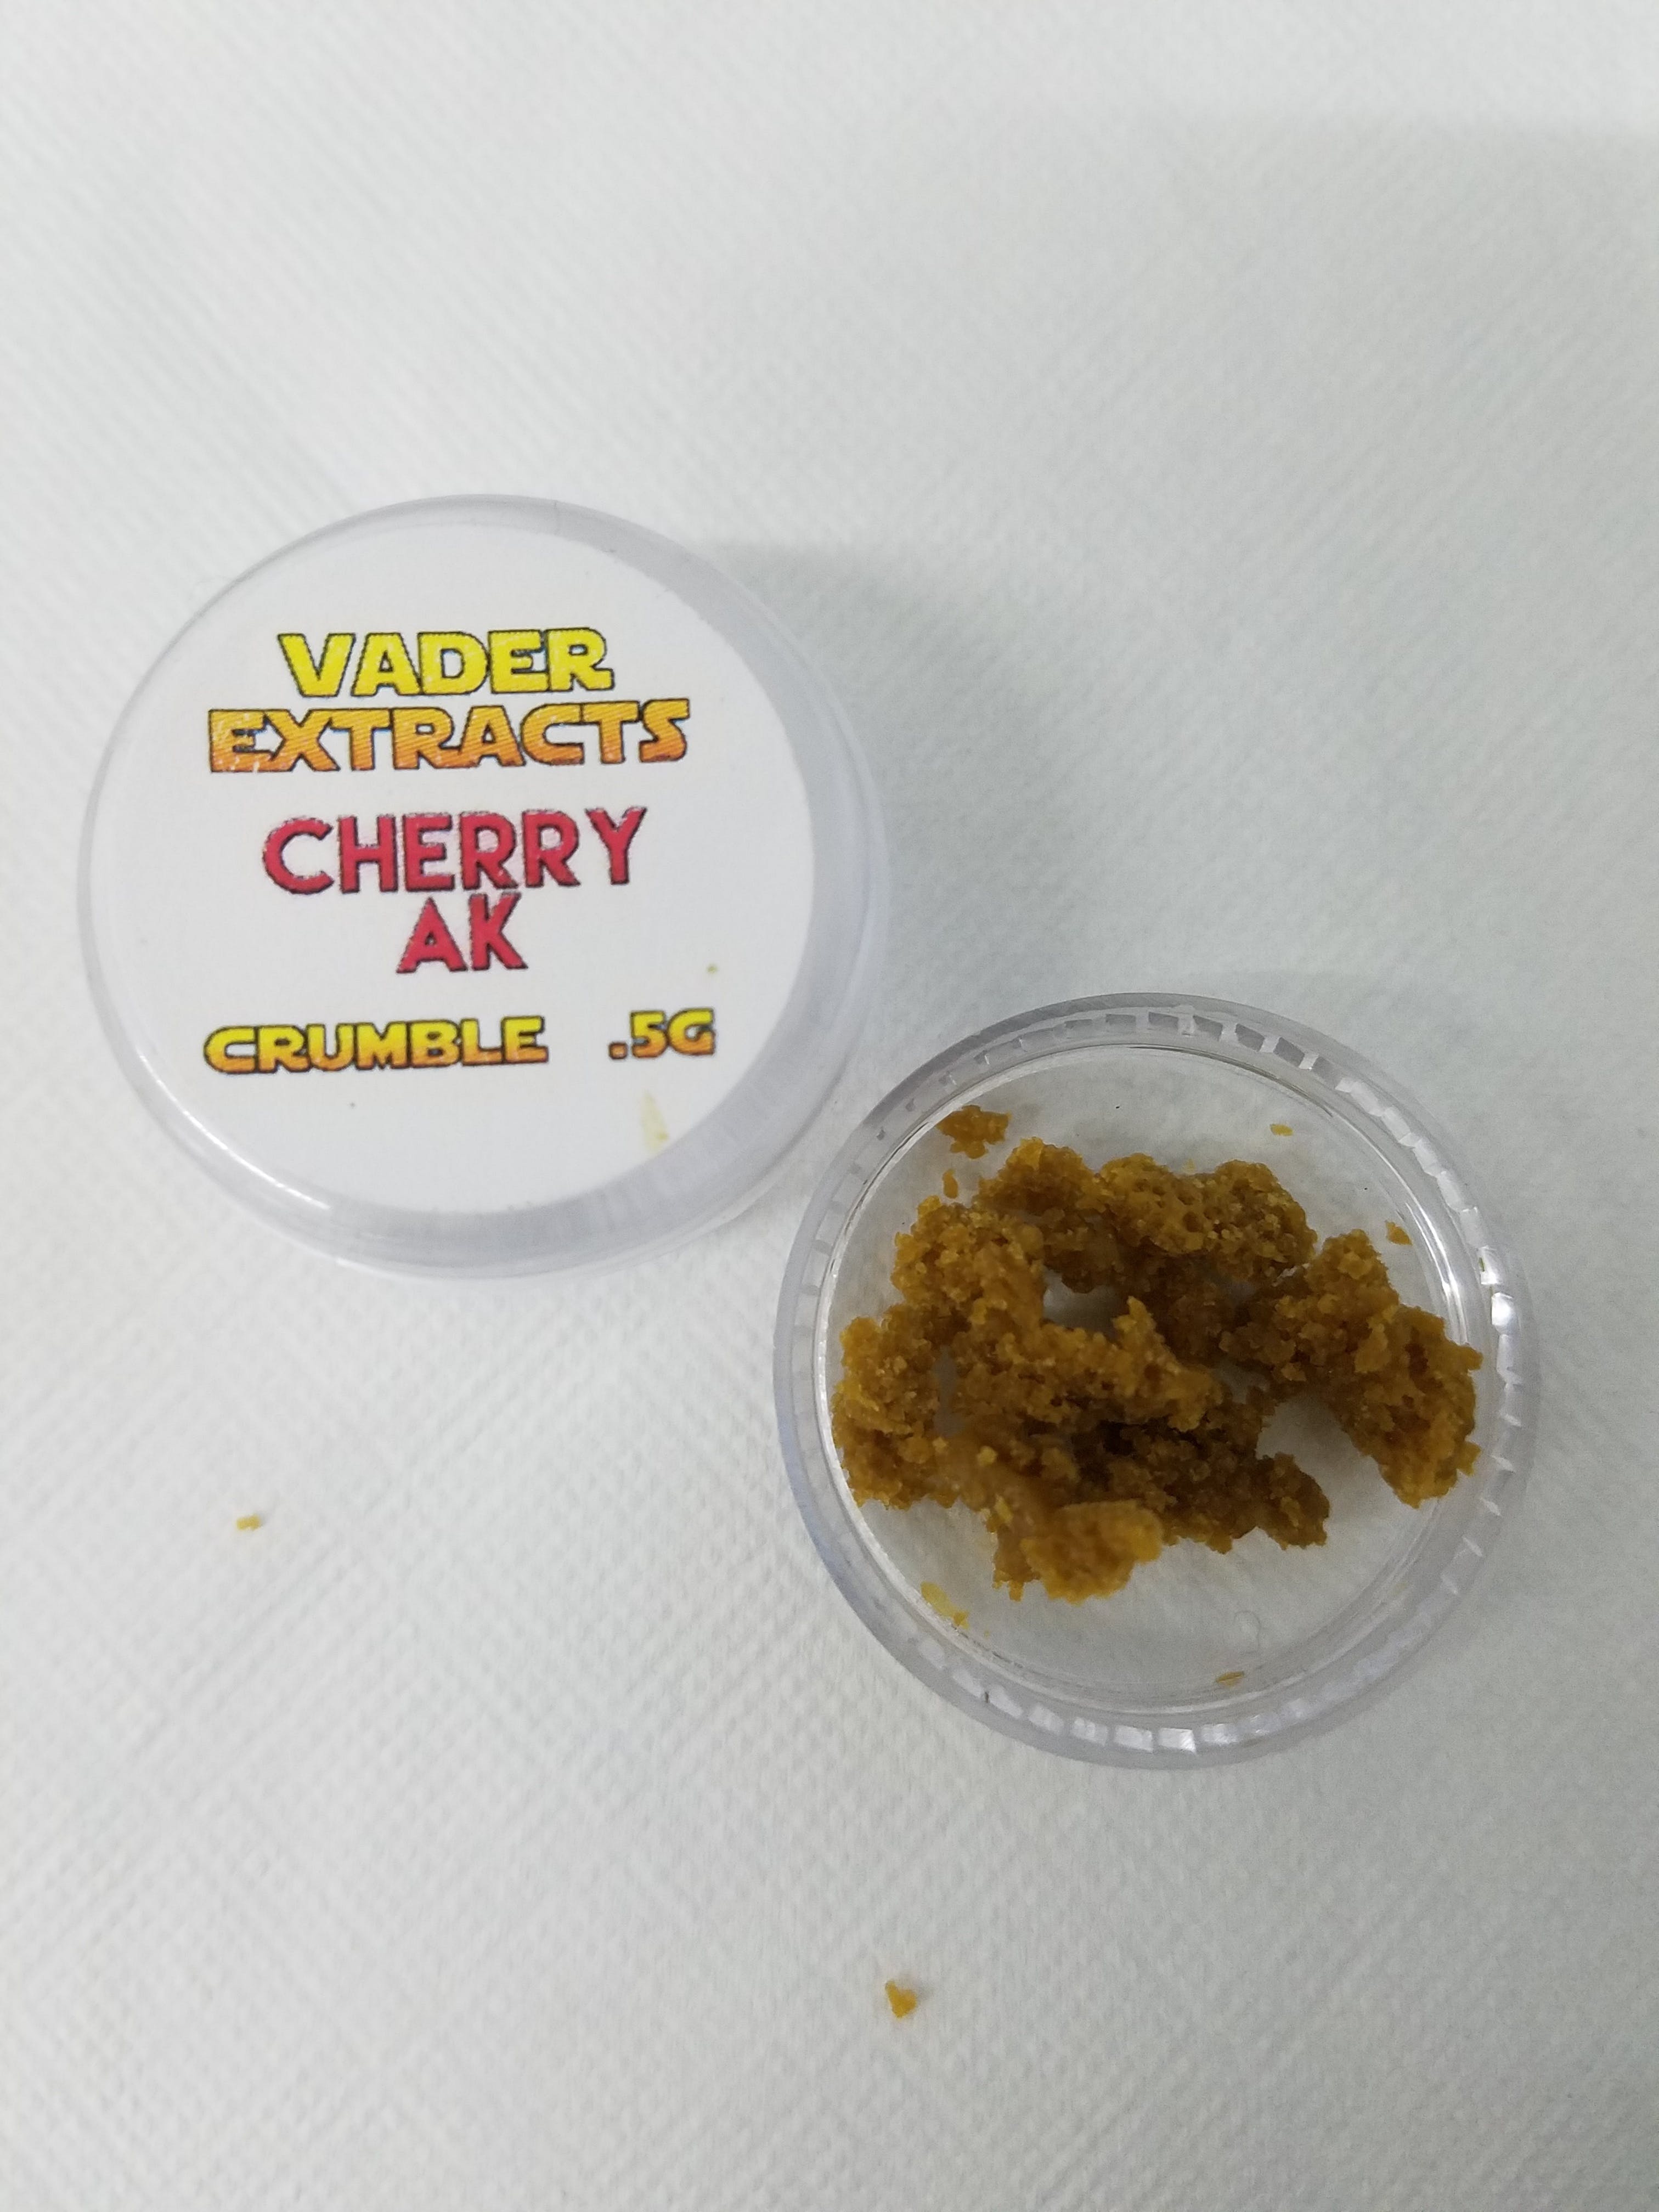 wax-vader-extracts-cherry-ak-crumble